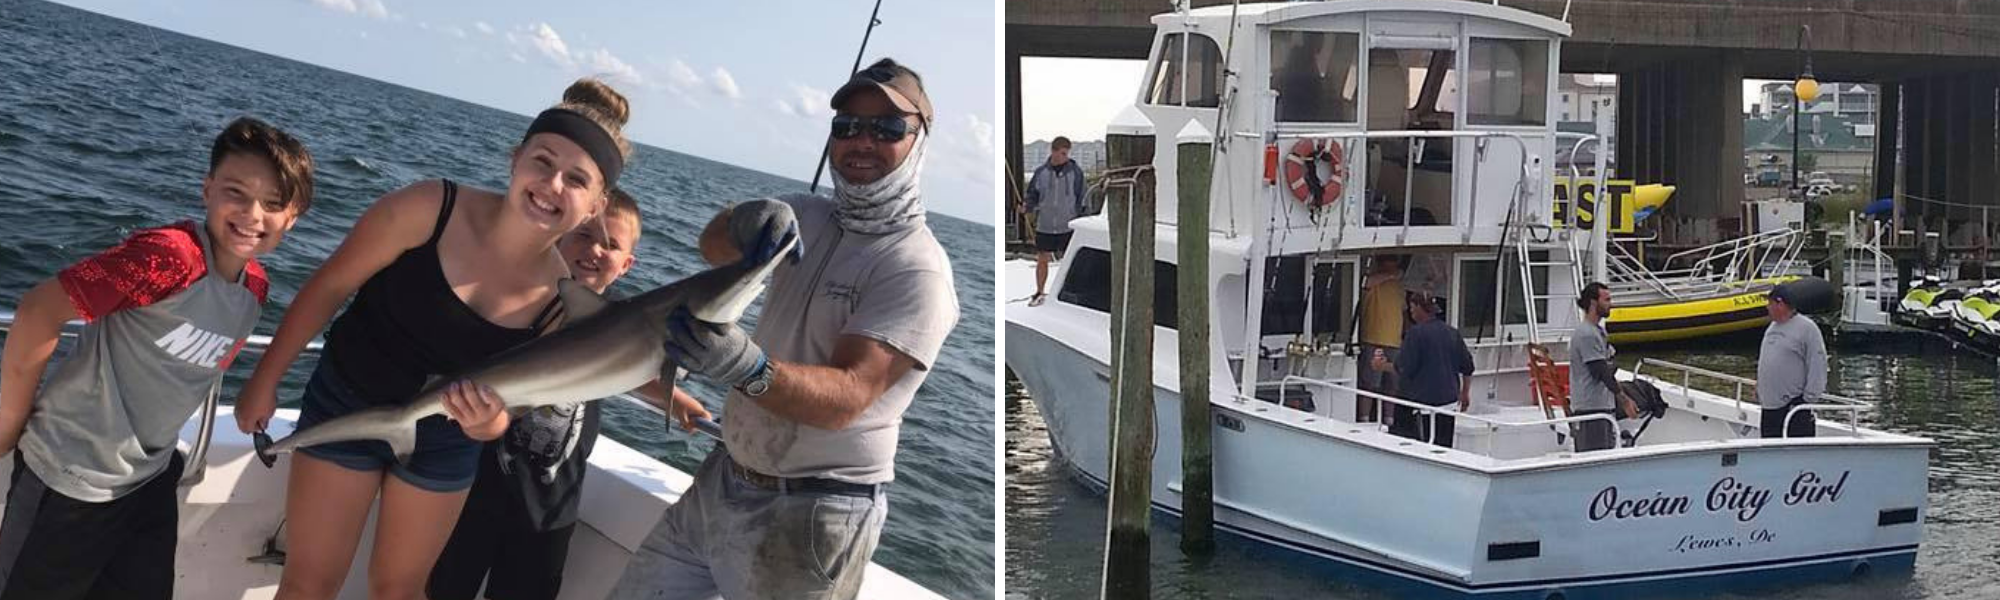 Ocean City MD Fishing Charters